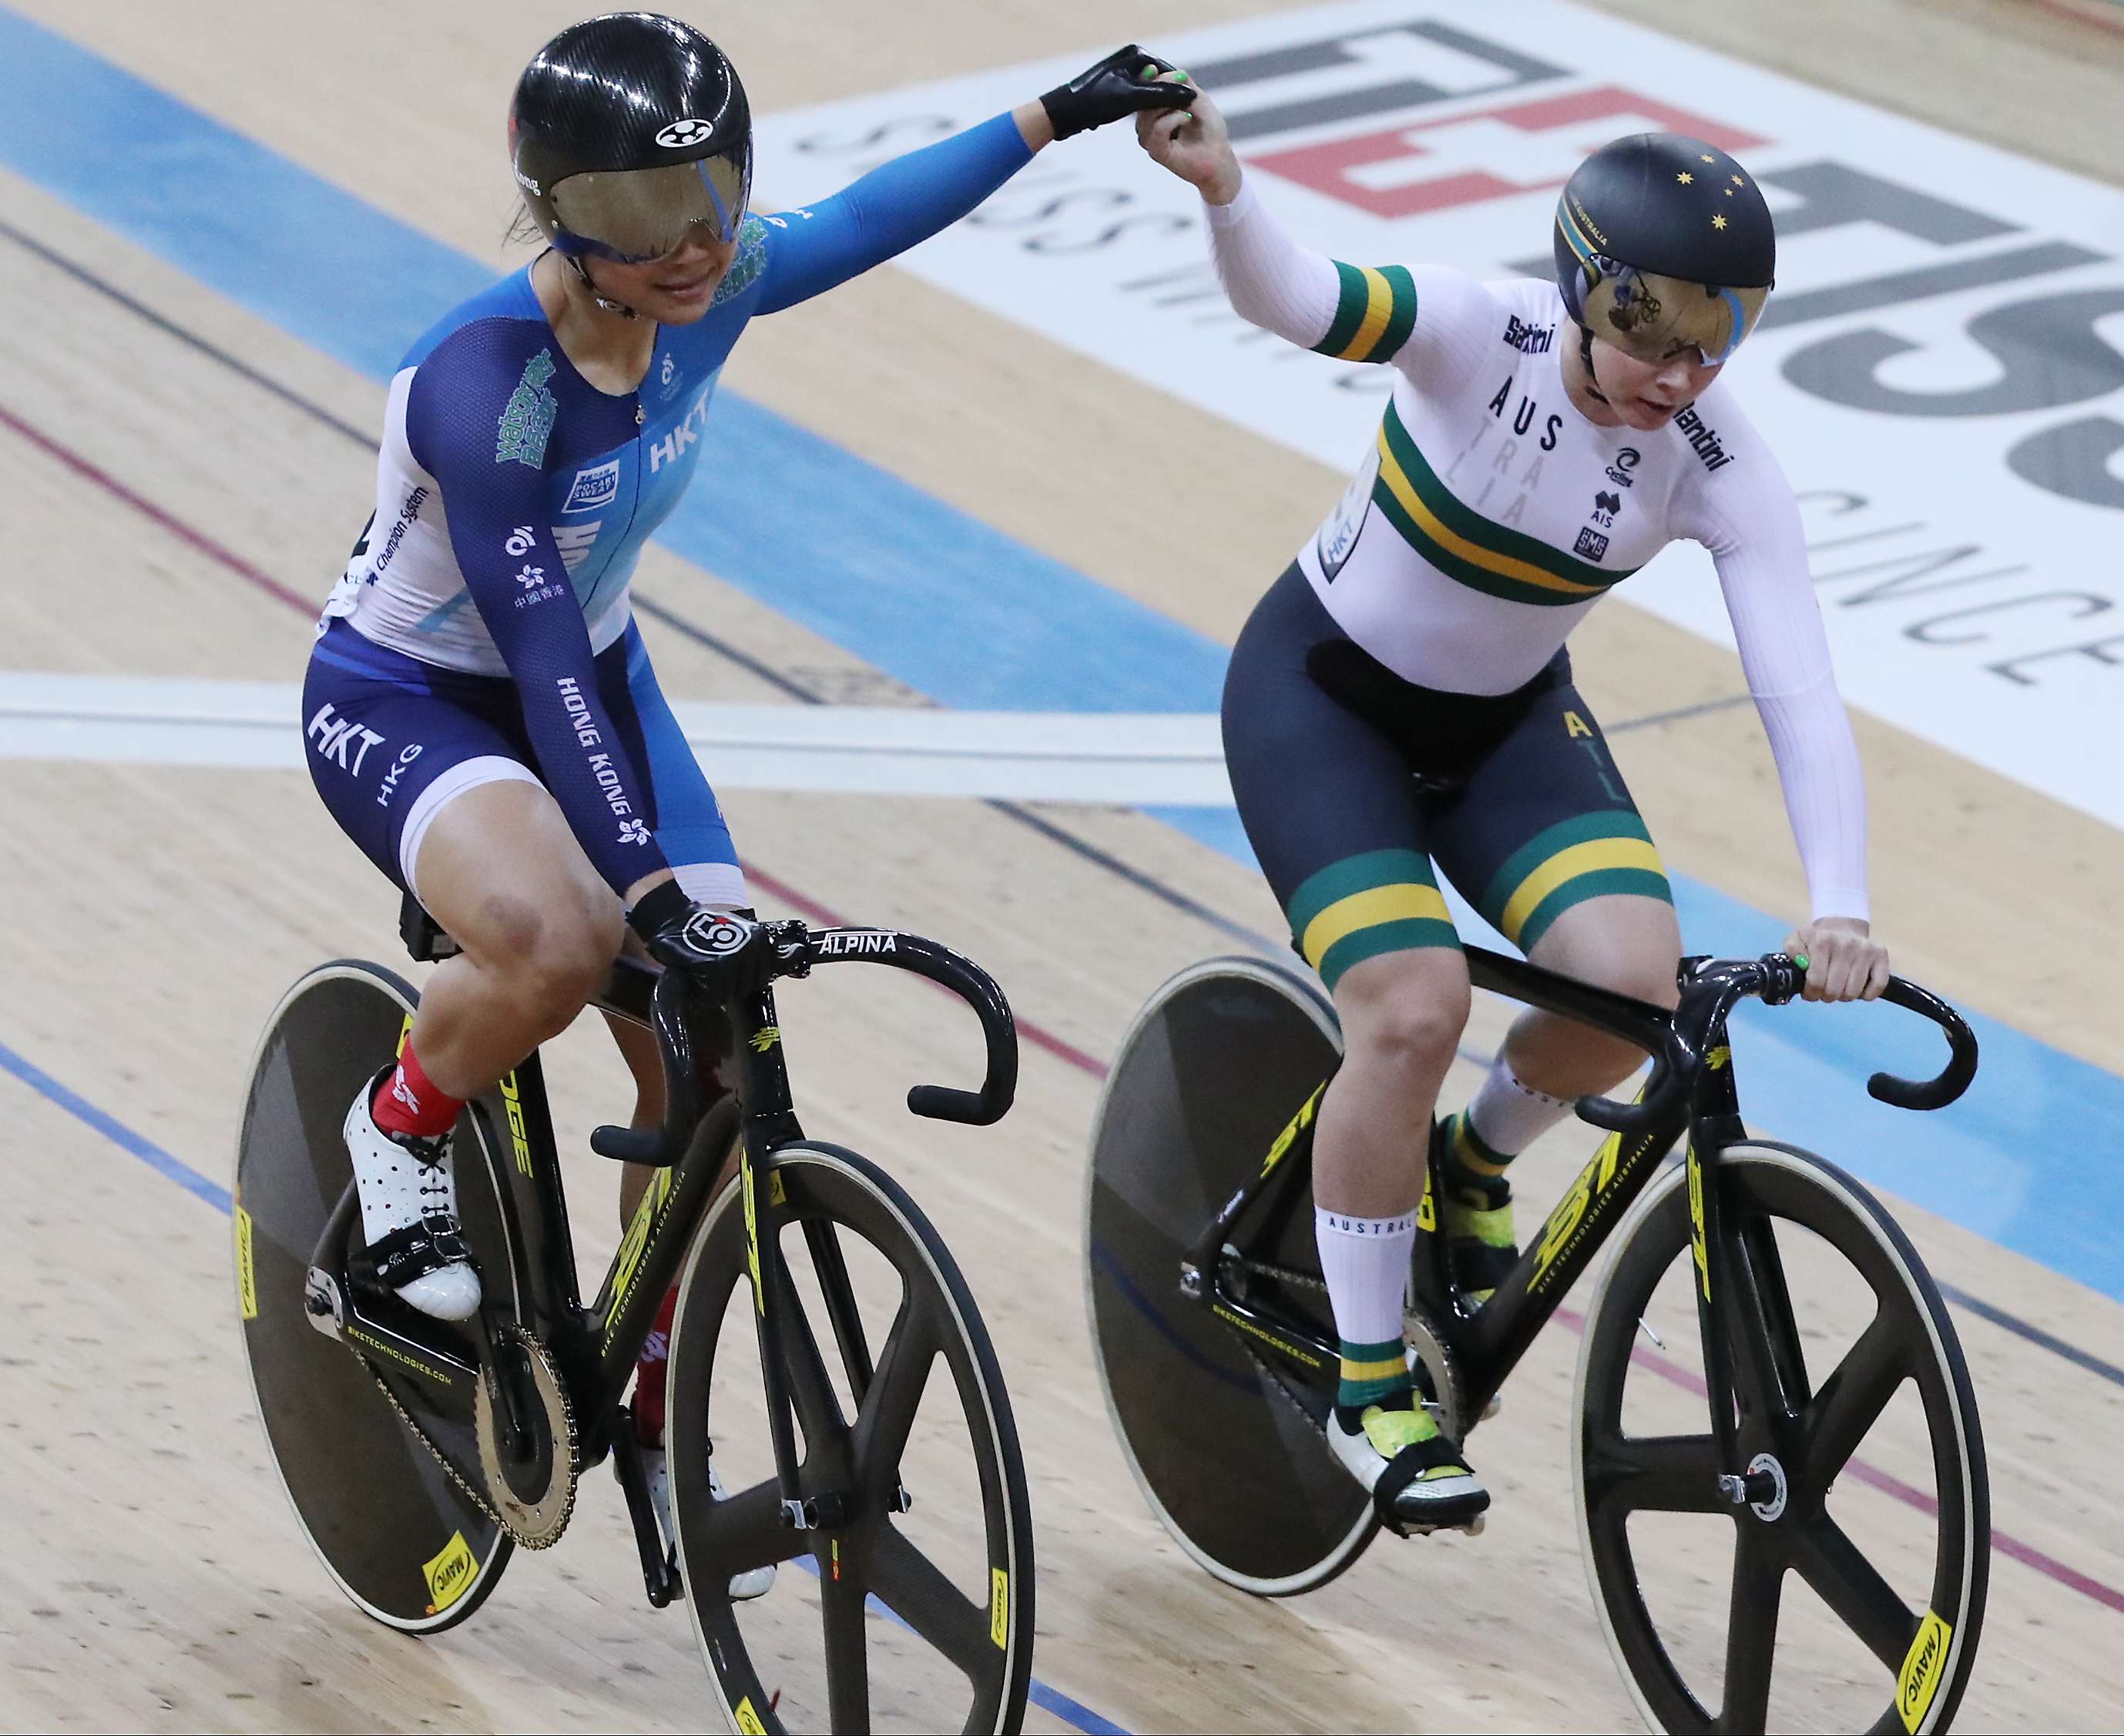 Hong Kong's Sarah Lee in a sporting gesture with Australia’s Kaarle McCulloch, after beating McCulloch in the quarter-finals of the women’s sprint at the Track Cycling World Championships. Photo: Edward Wong